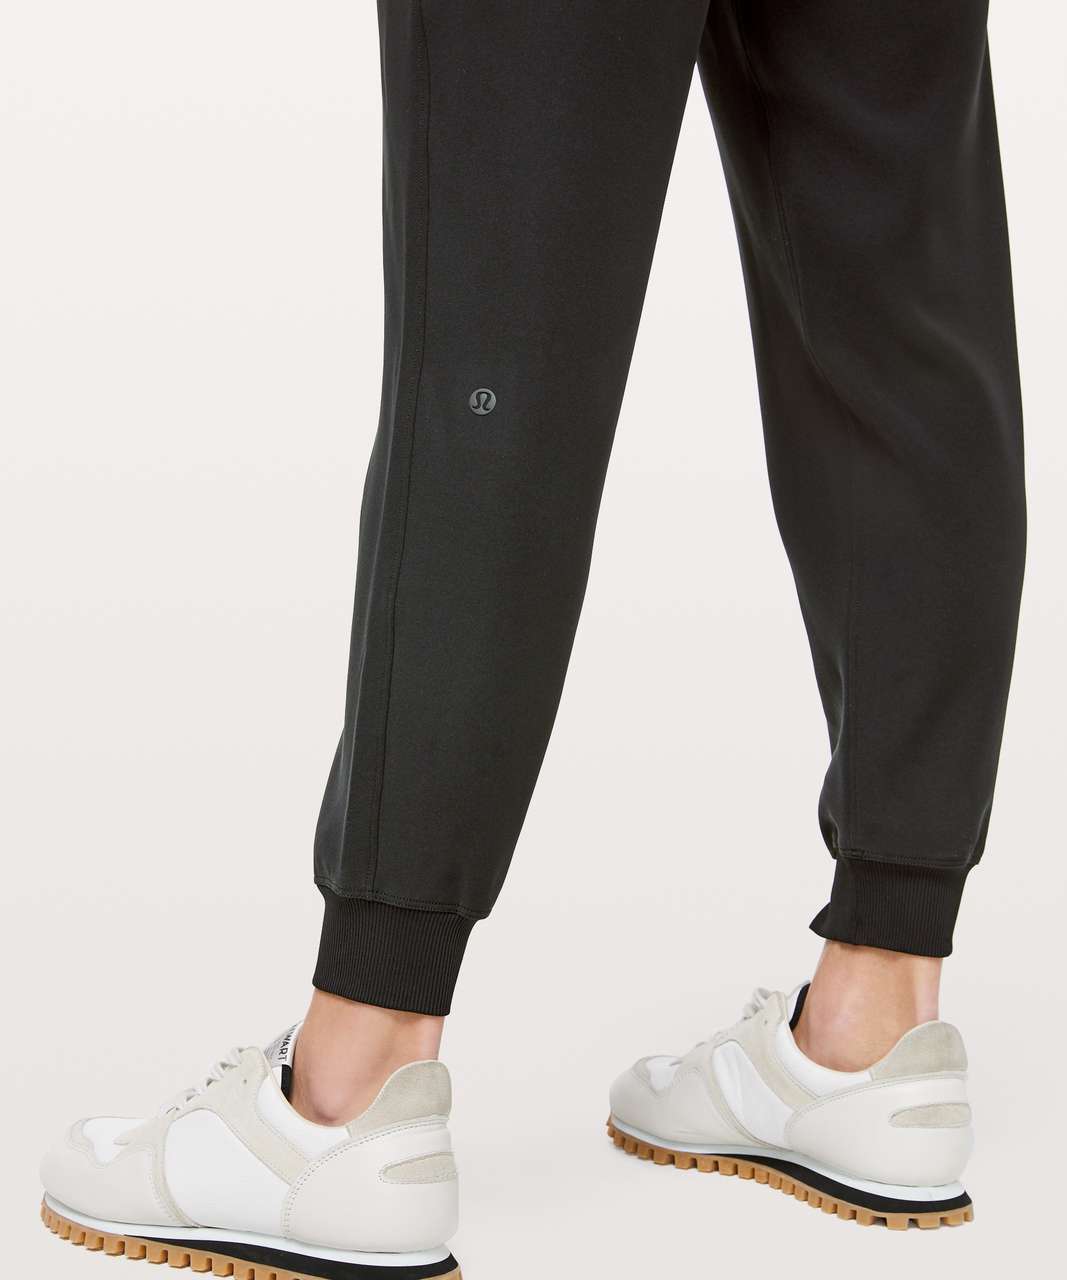 On the Fly Jogger 28 *Full-On Luxtreme